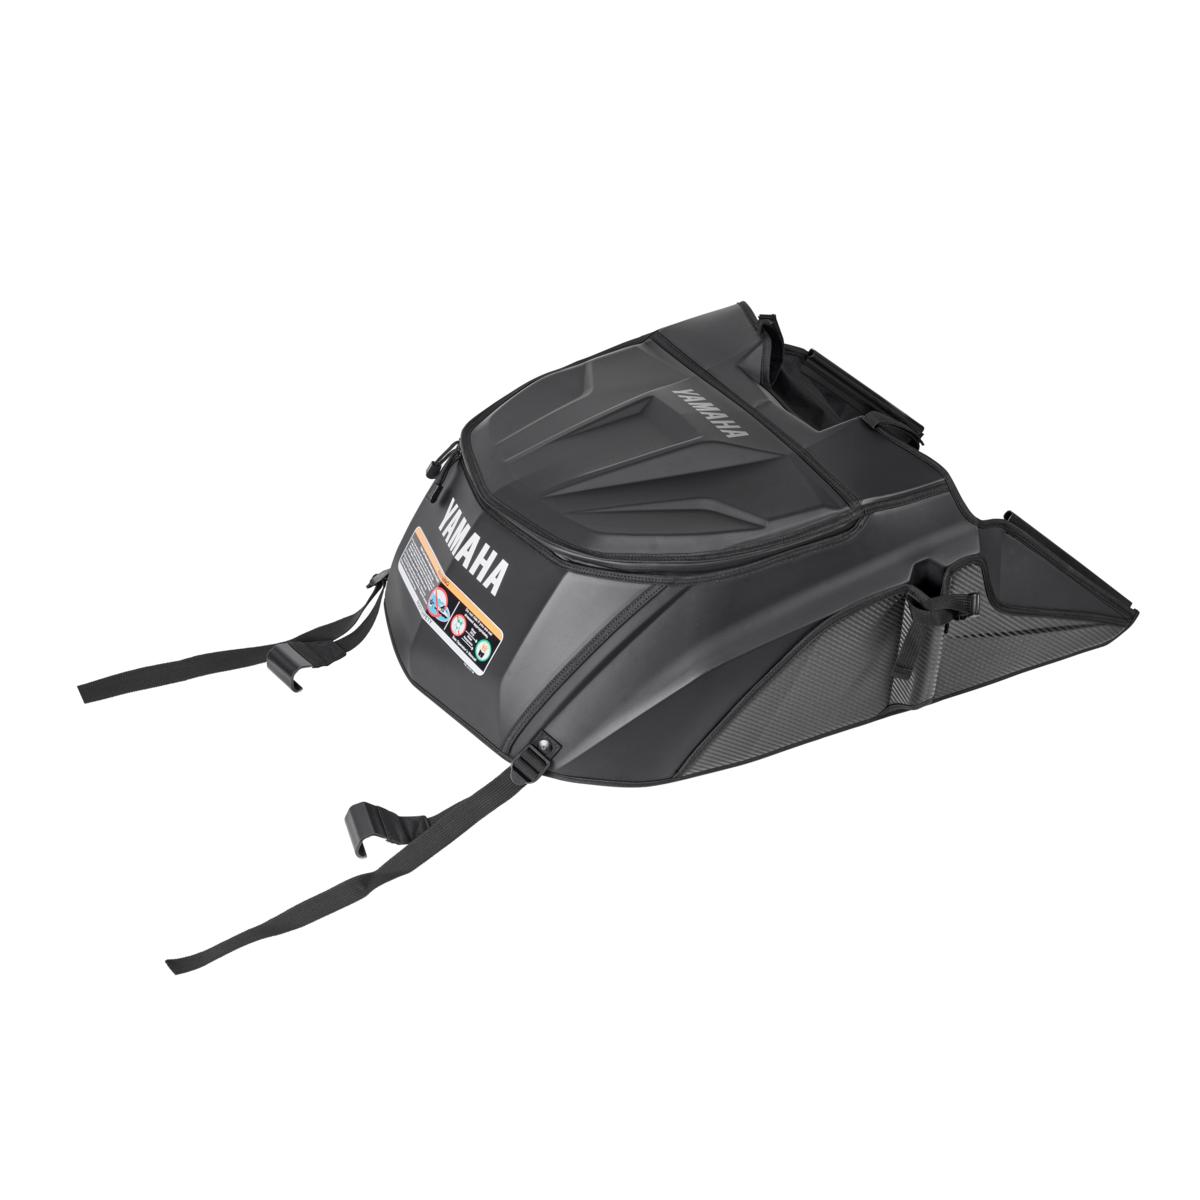 Take your VX wet storage capacity to the next level with our large 40 liter VX Stern Mounted Storage solution. Built from durable, weather resistant compression-molded black EVA foam. Furthermore, it allows access to the stern tow point for watersports usage without removing the bag.